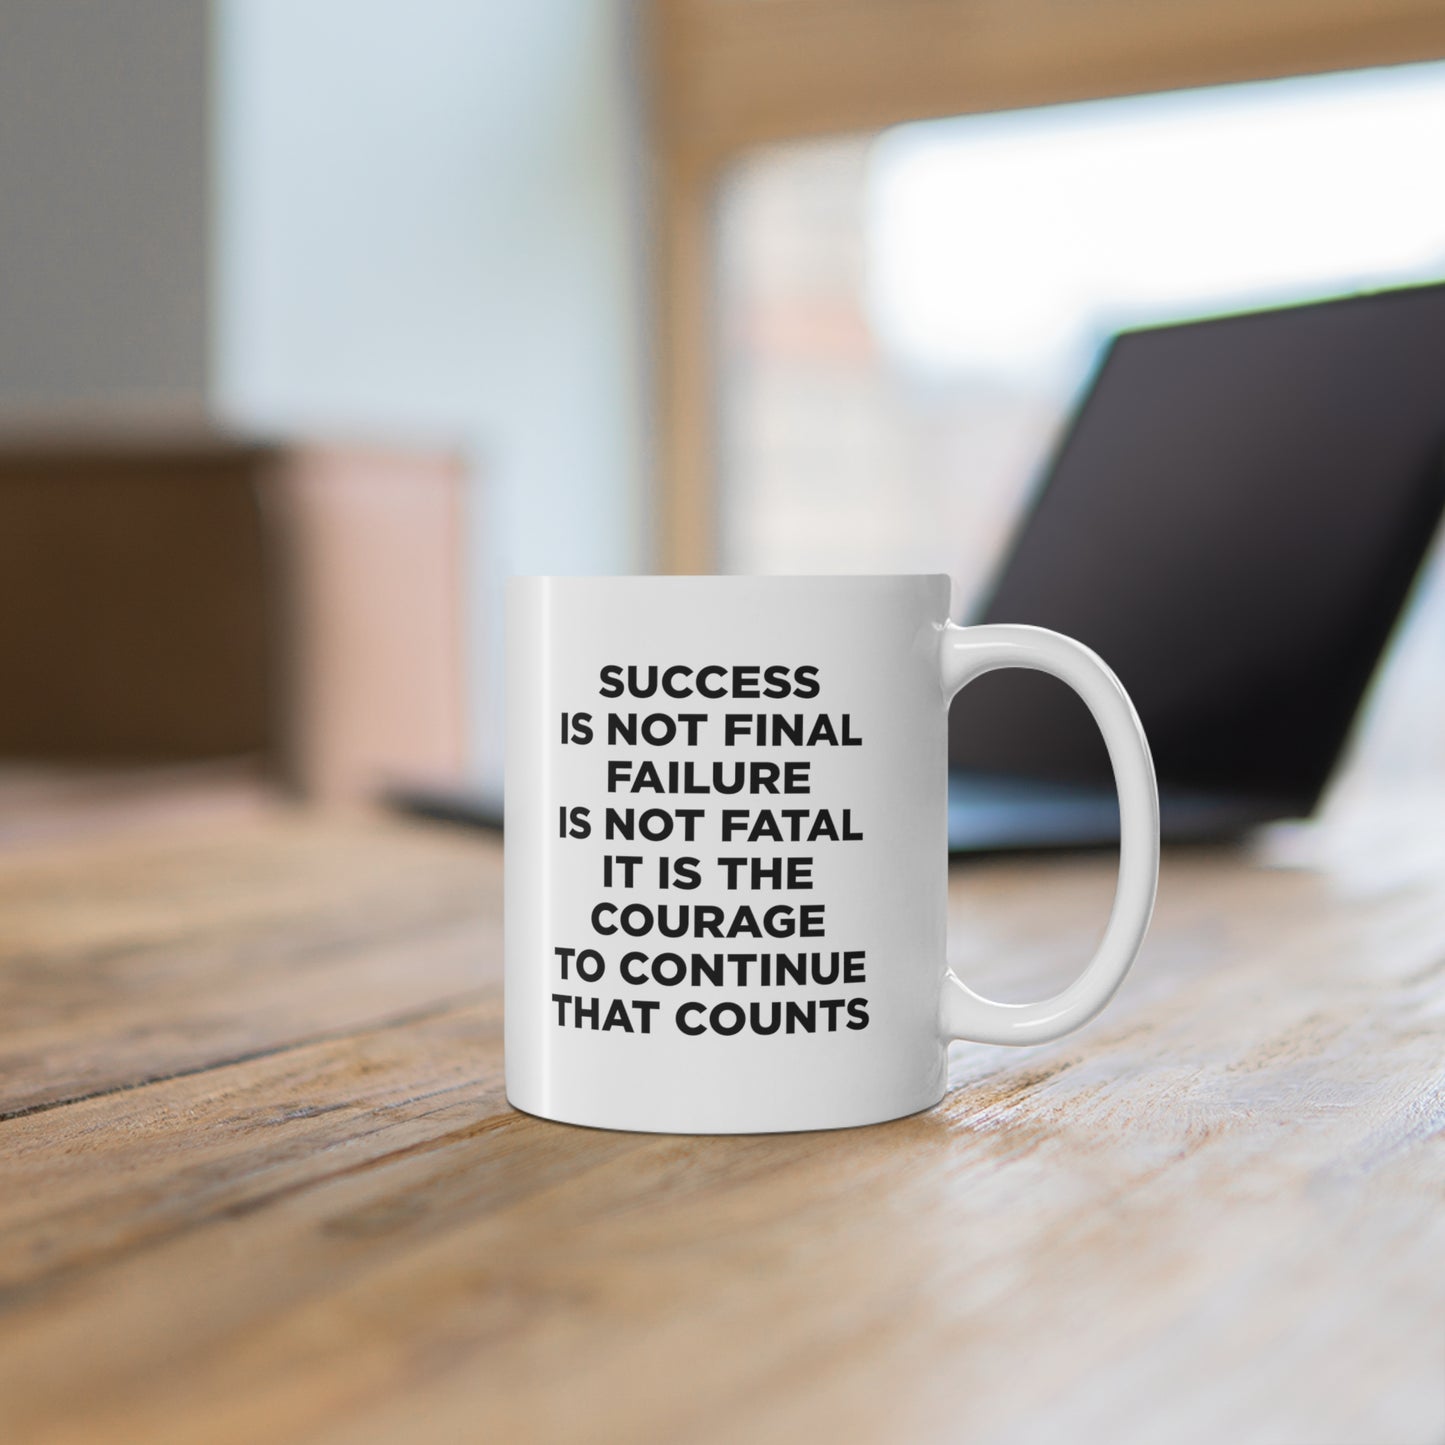 ceramic mug with quote: Success is not final failure is not fatal It is the courage to continue that counts